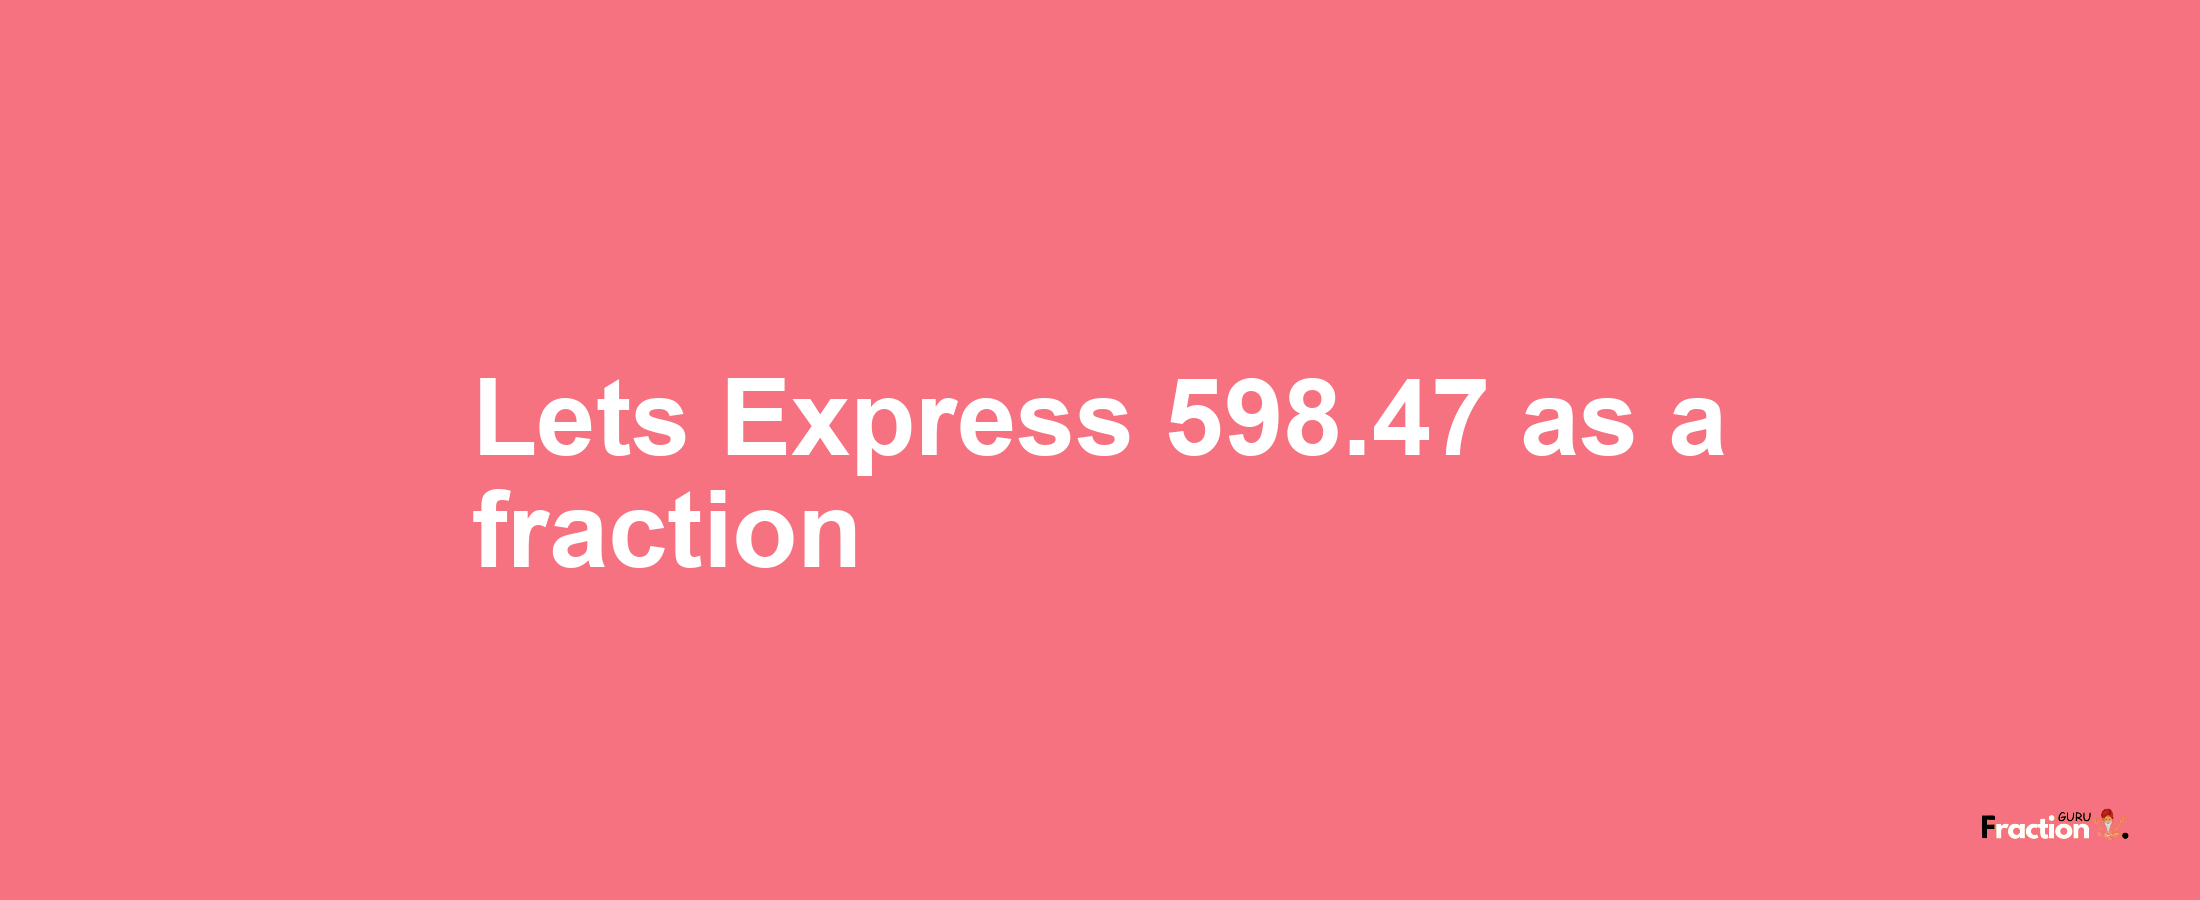 Lets Express 598.47 as afraction